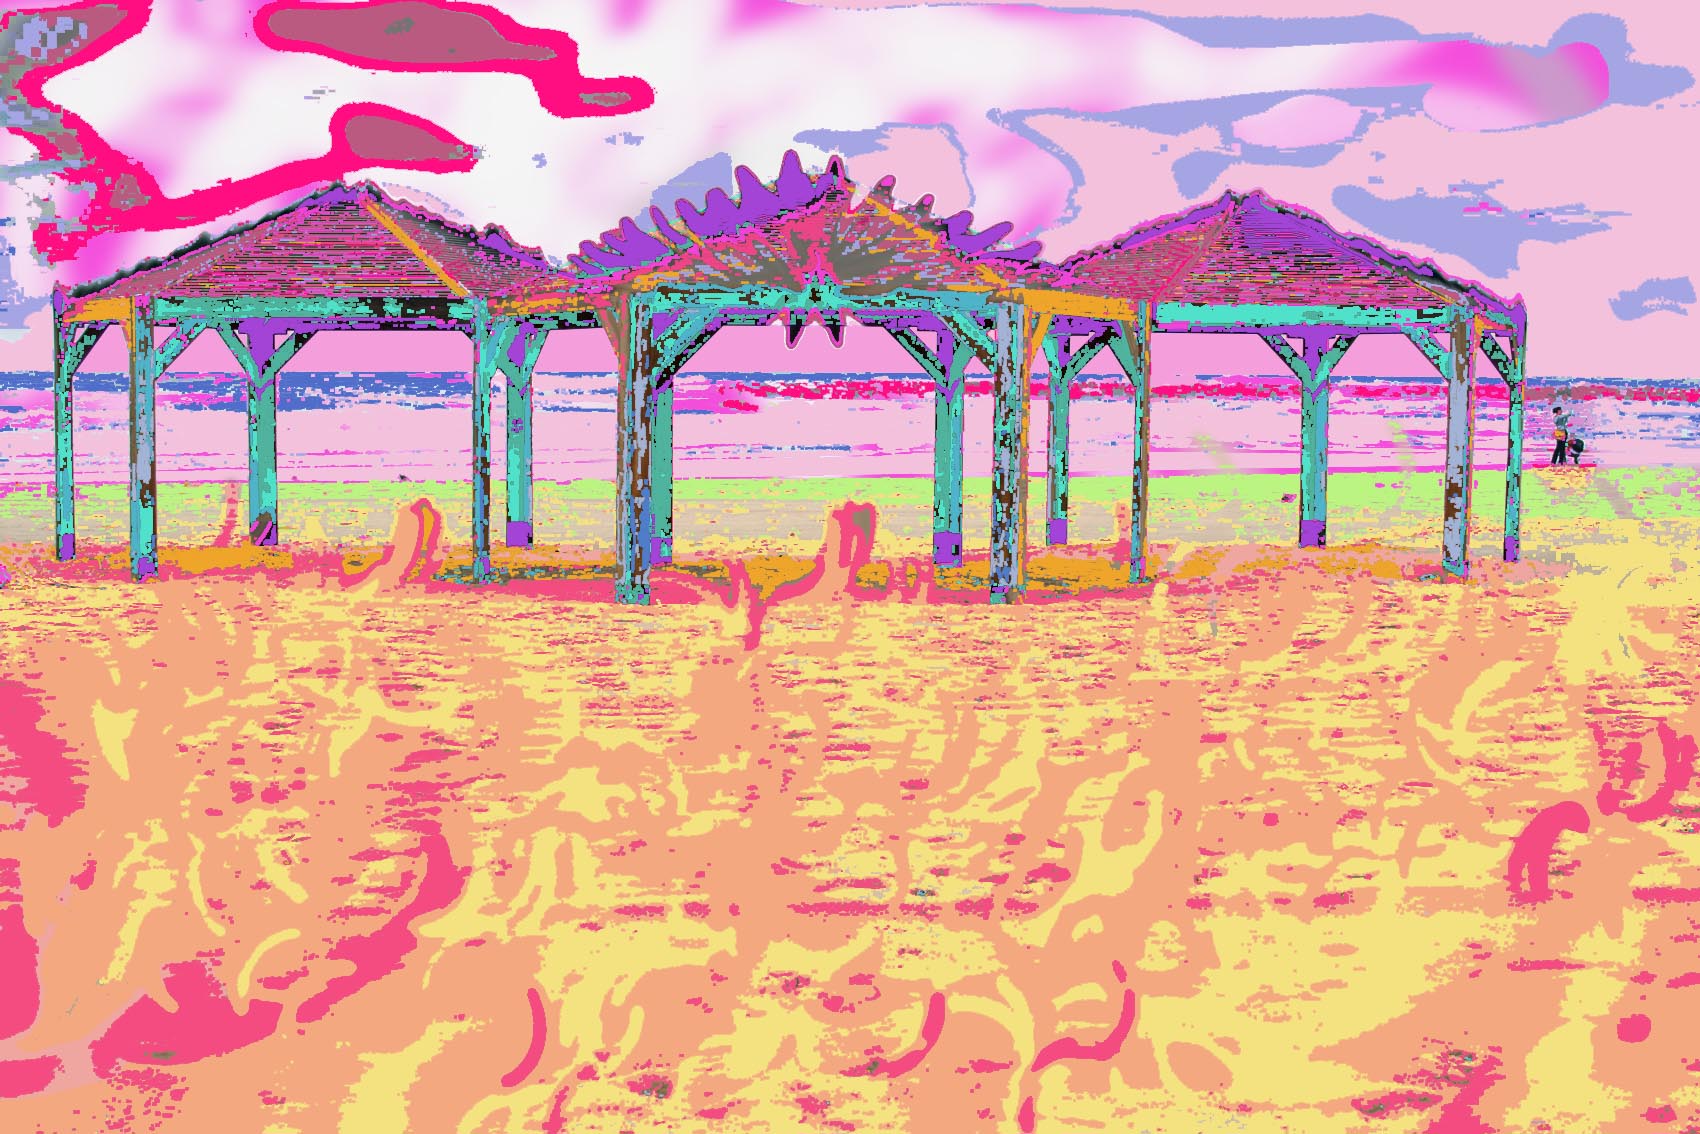 Trippy Beach Wallpapers